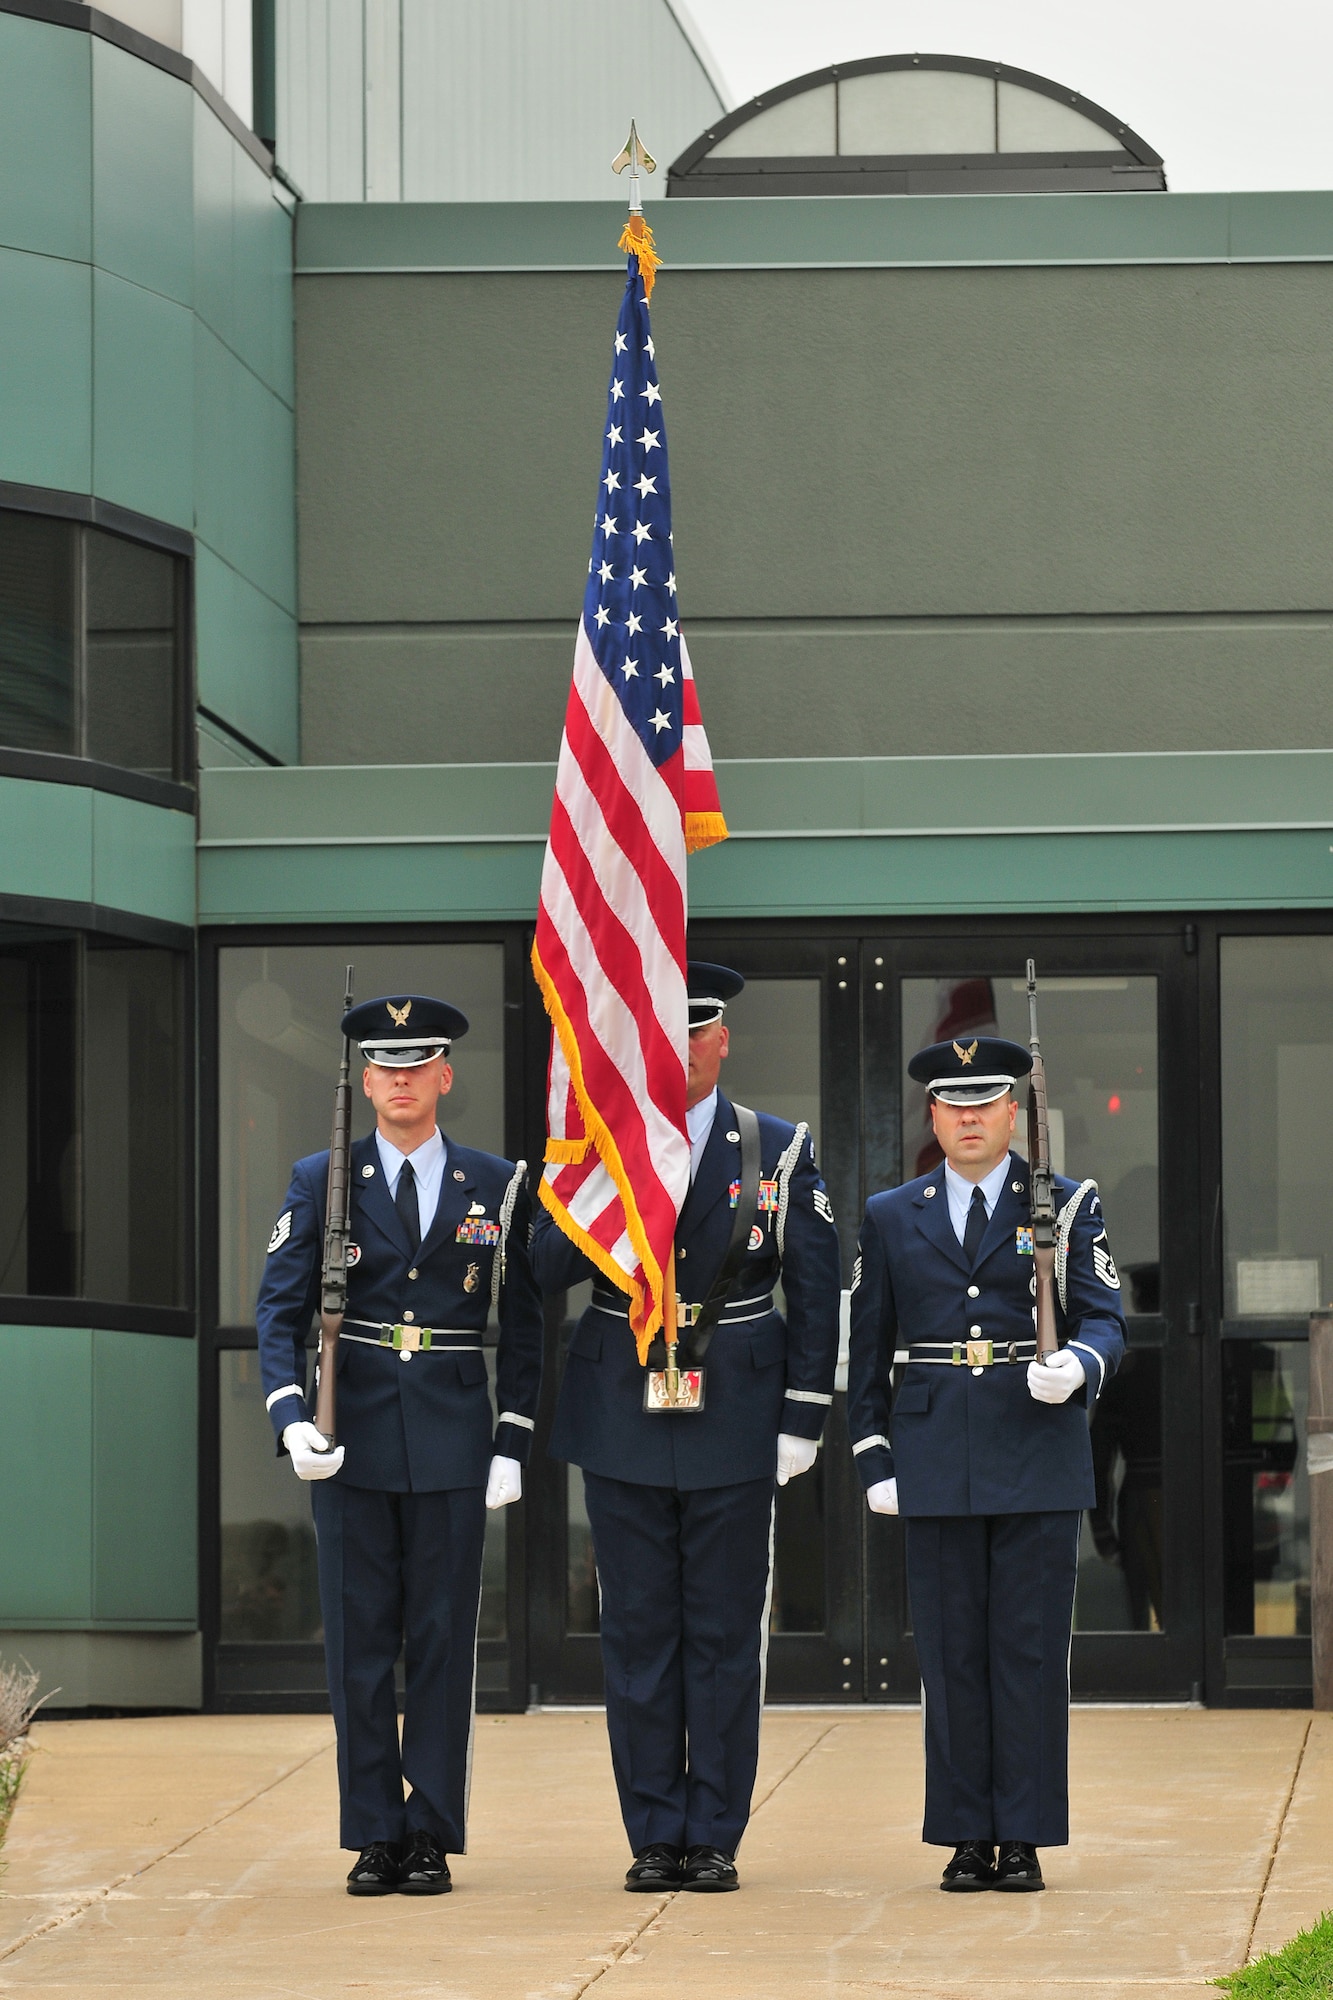 Volk Field honor guard team members Tech. Sgt. James Michaels, left, Staff Sgt. Robert Garrelts, center, and Master Sgt. Don Millbach present the colors at the 2010 Volk Field Air National Guard Base Open House on August 21, 2010. Despite inclement weather, the Volk Field Open house attracted approximately 3000 visitors, 20 military and civilian aircraft, numerous vendors, and aerial performers from across the country.